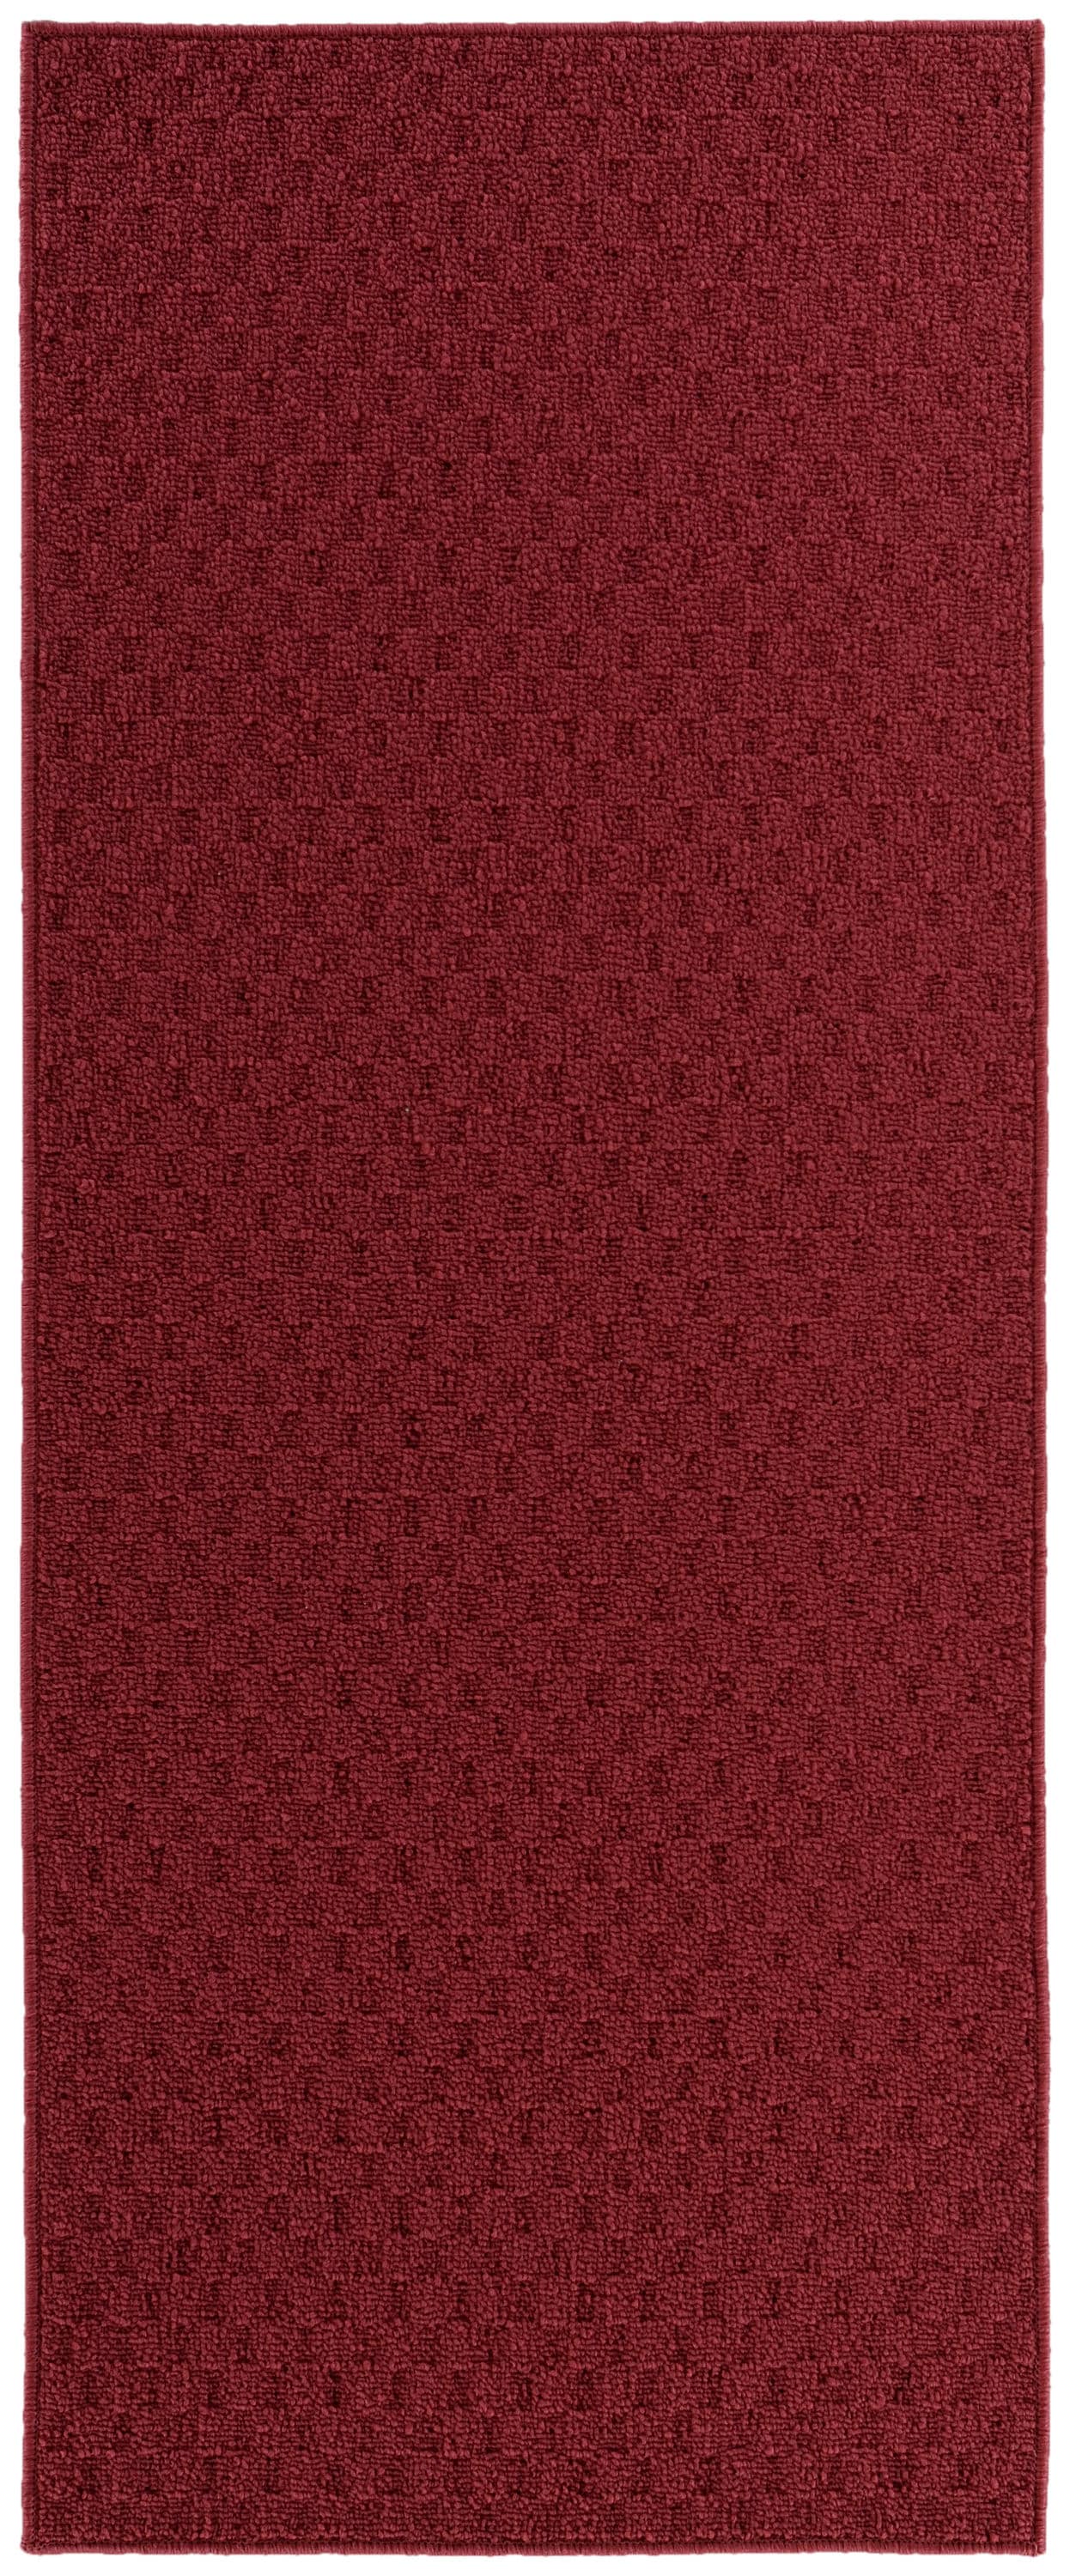 Garland Town Square 2 X 5 (ft) Chili Red Indoor Solid Lodge Runner Rug ...